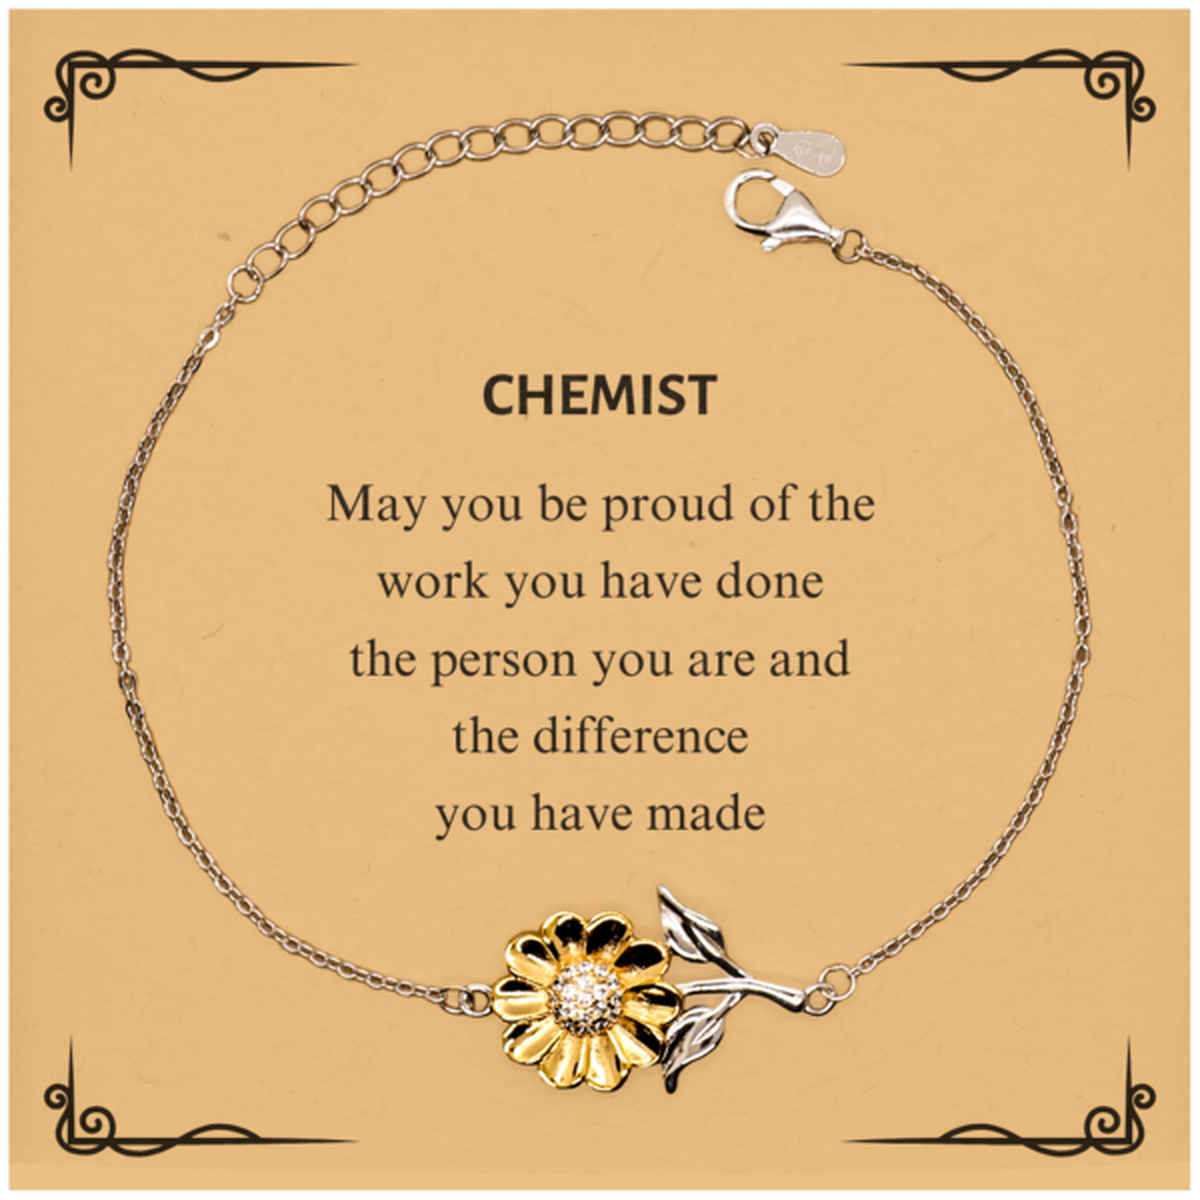 Chemist May you be proud of the work you have done, Retirement Chemist Sunflower Bracelet for Colleague Appreciation Gifts Amazing for Chemist